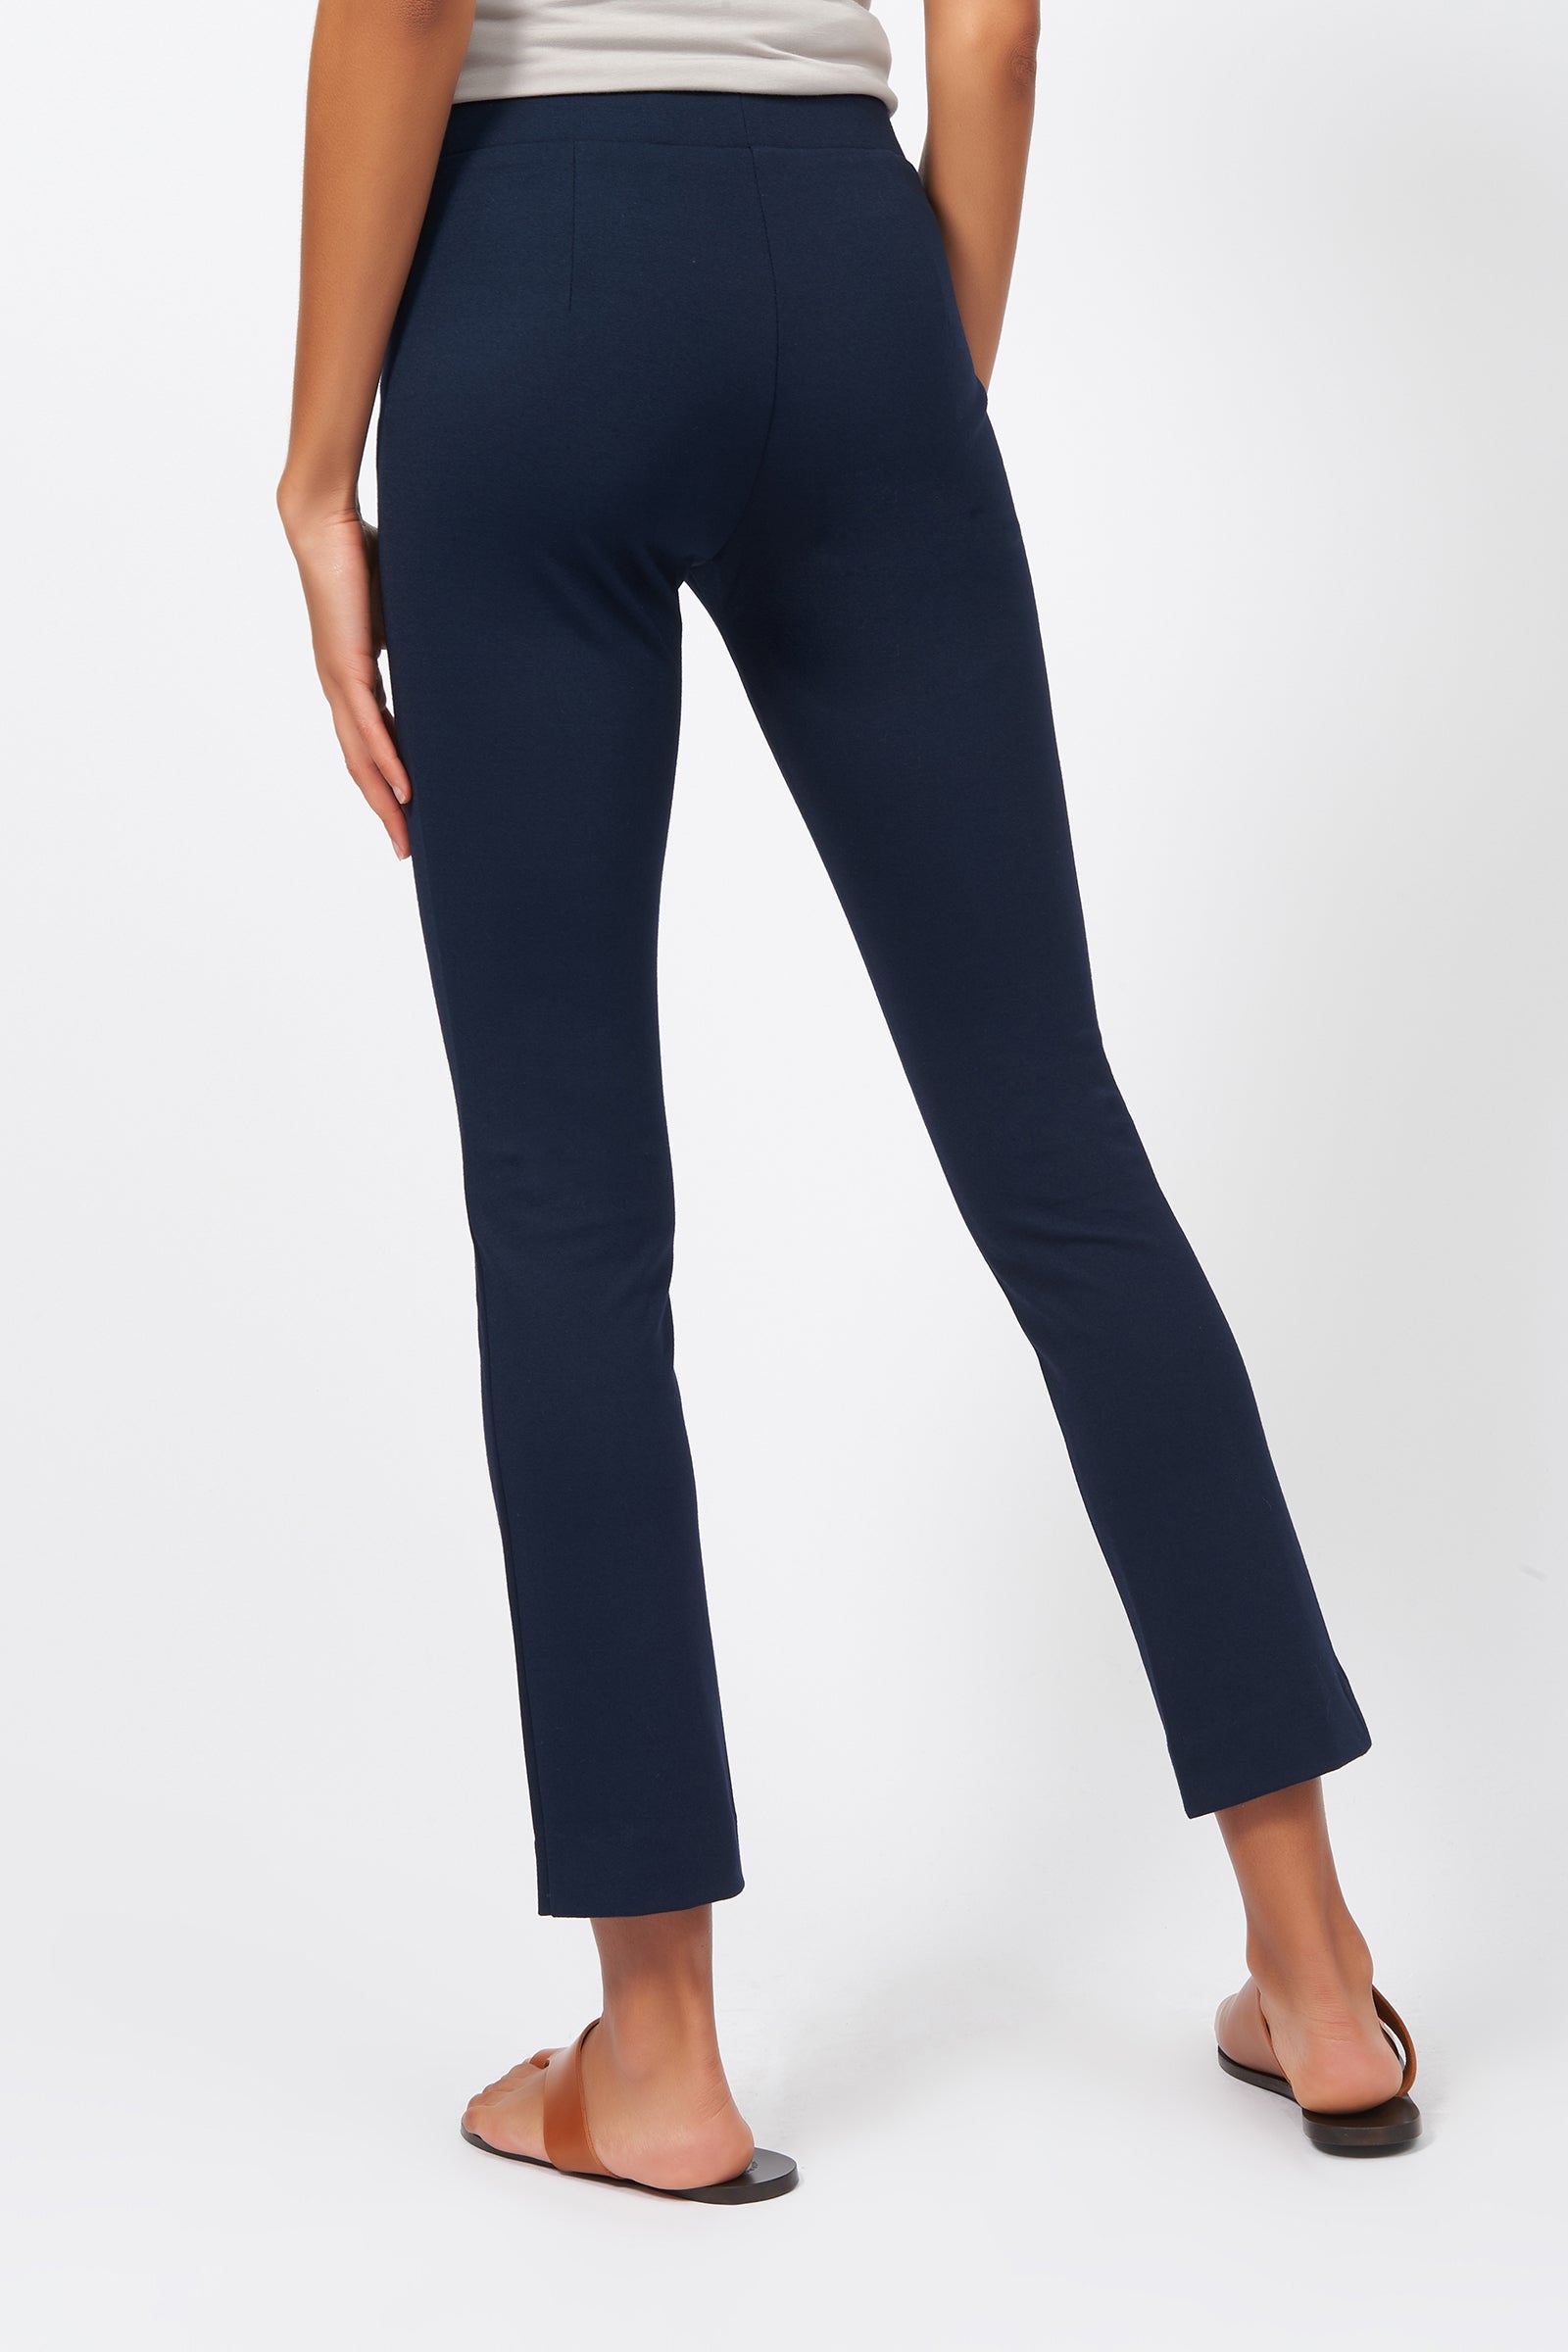 Kal Rieman Pintuck Ponte Ankle Pant in Navy on Model Full Front View